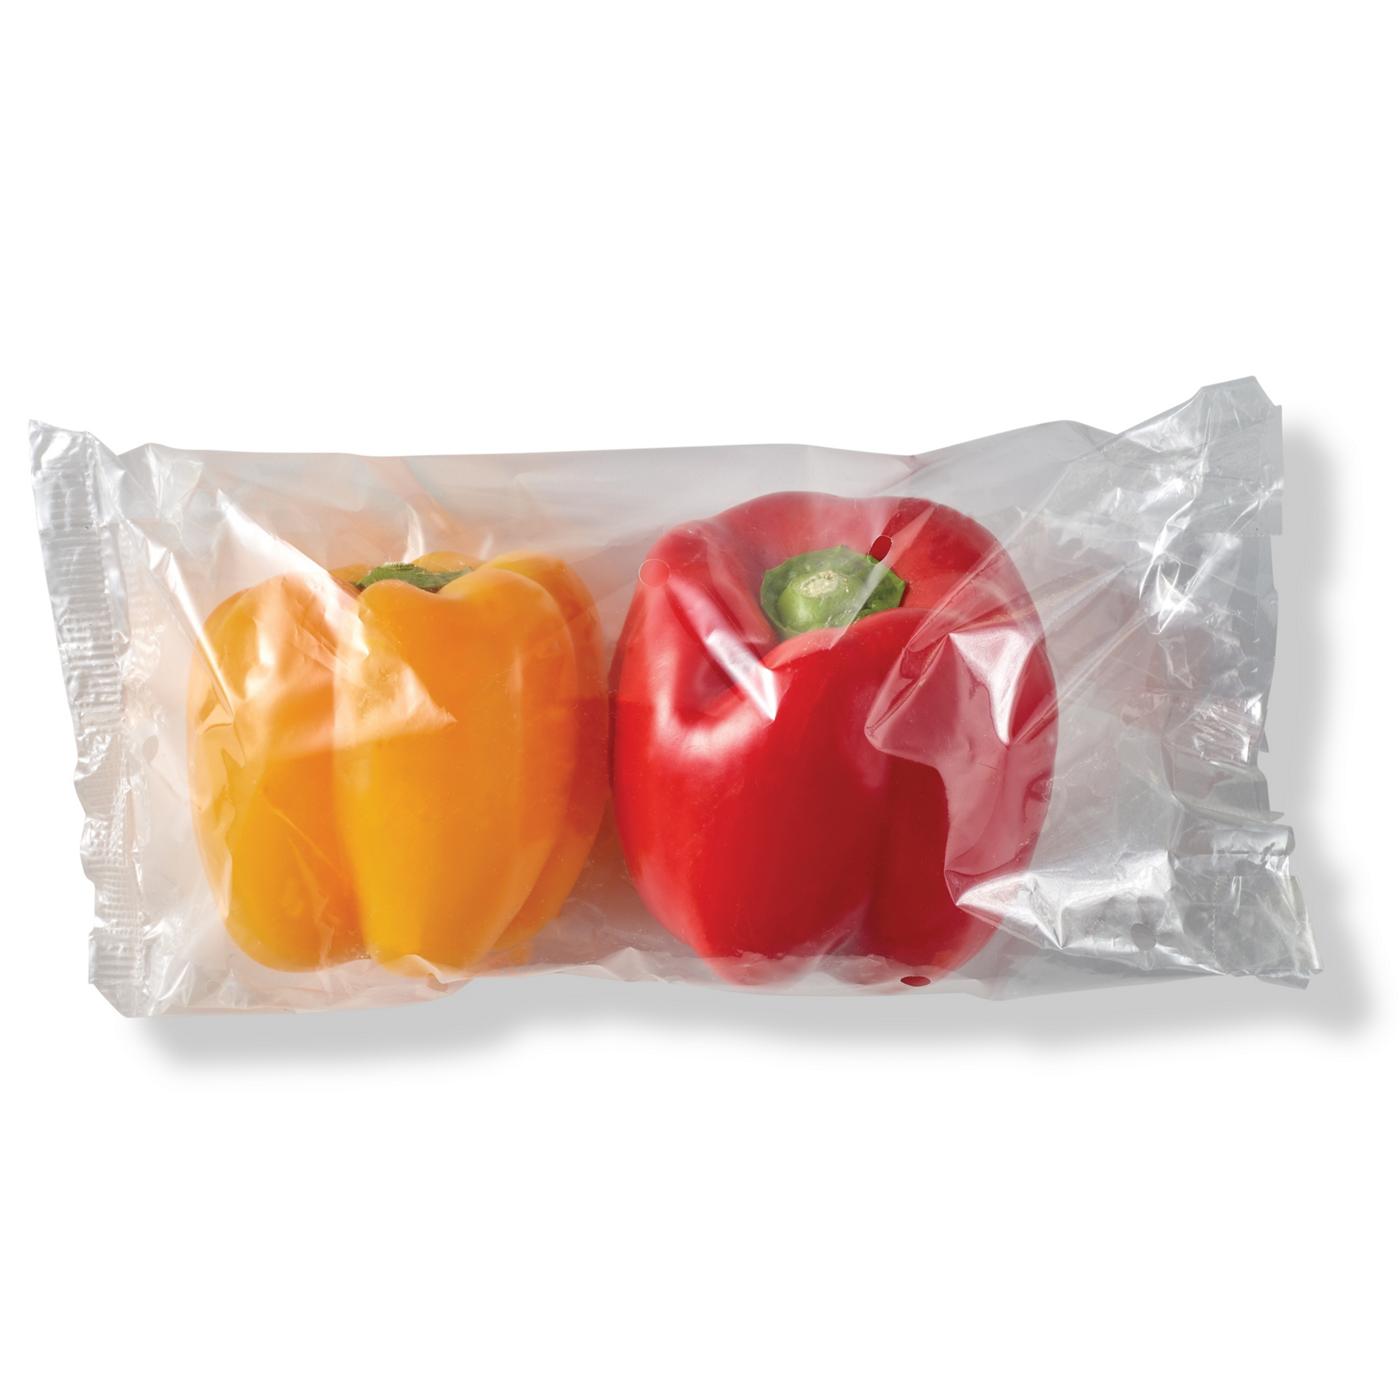 Fresh Organic Colorful Bell Peppers; image 1 of 2